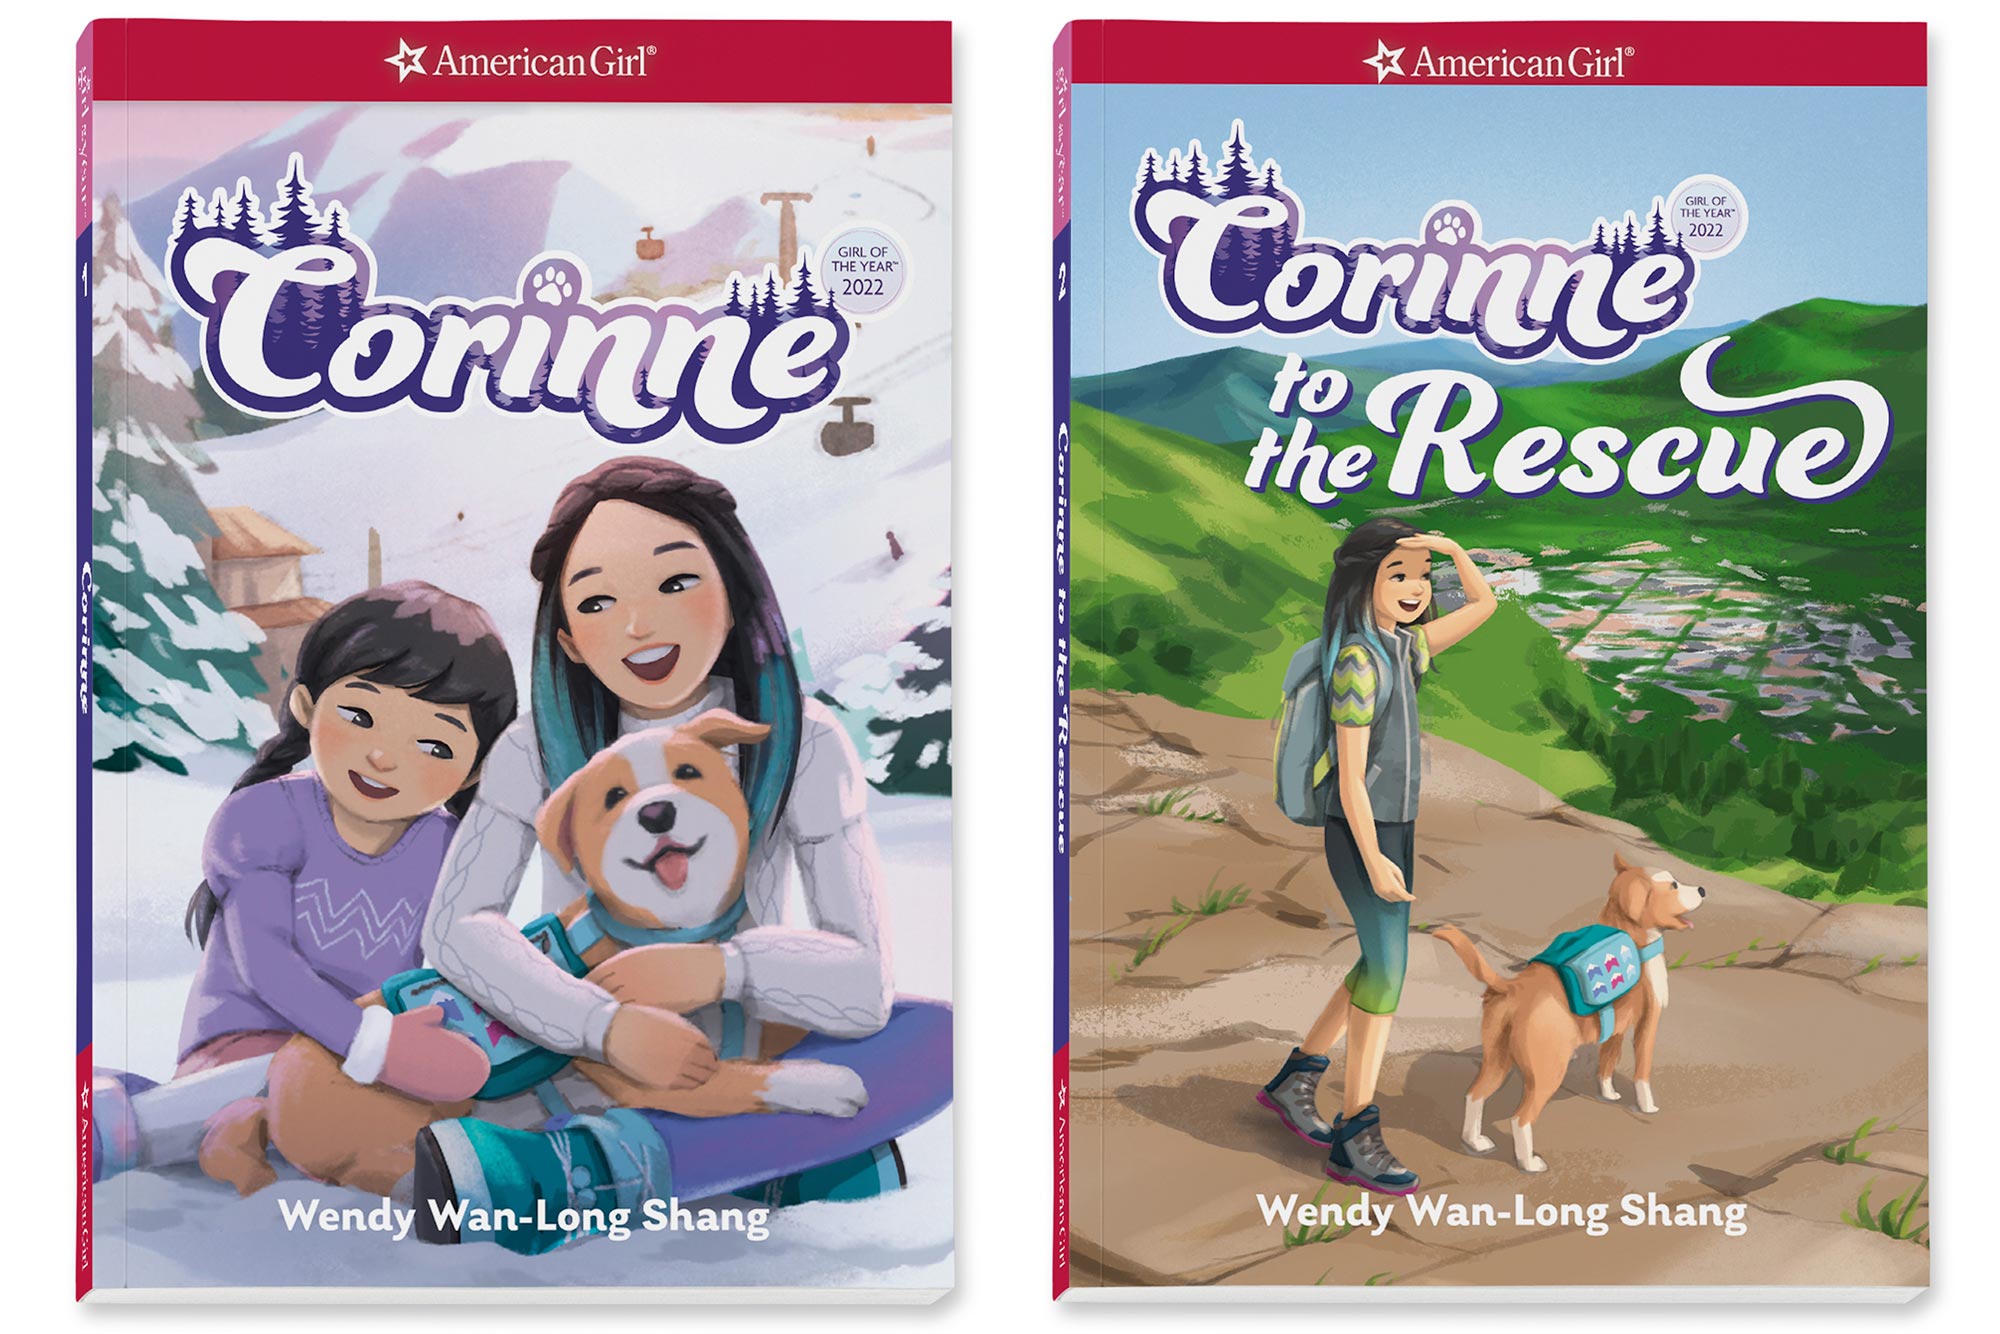 American Girl book covers Corrine and Corinne to the Rescue